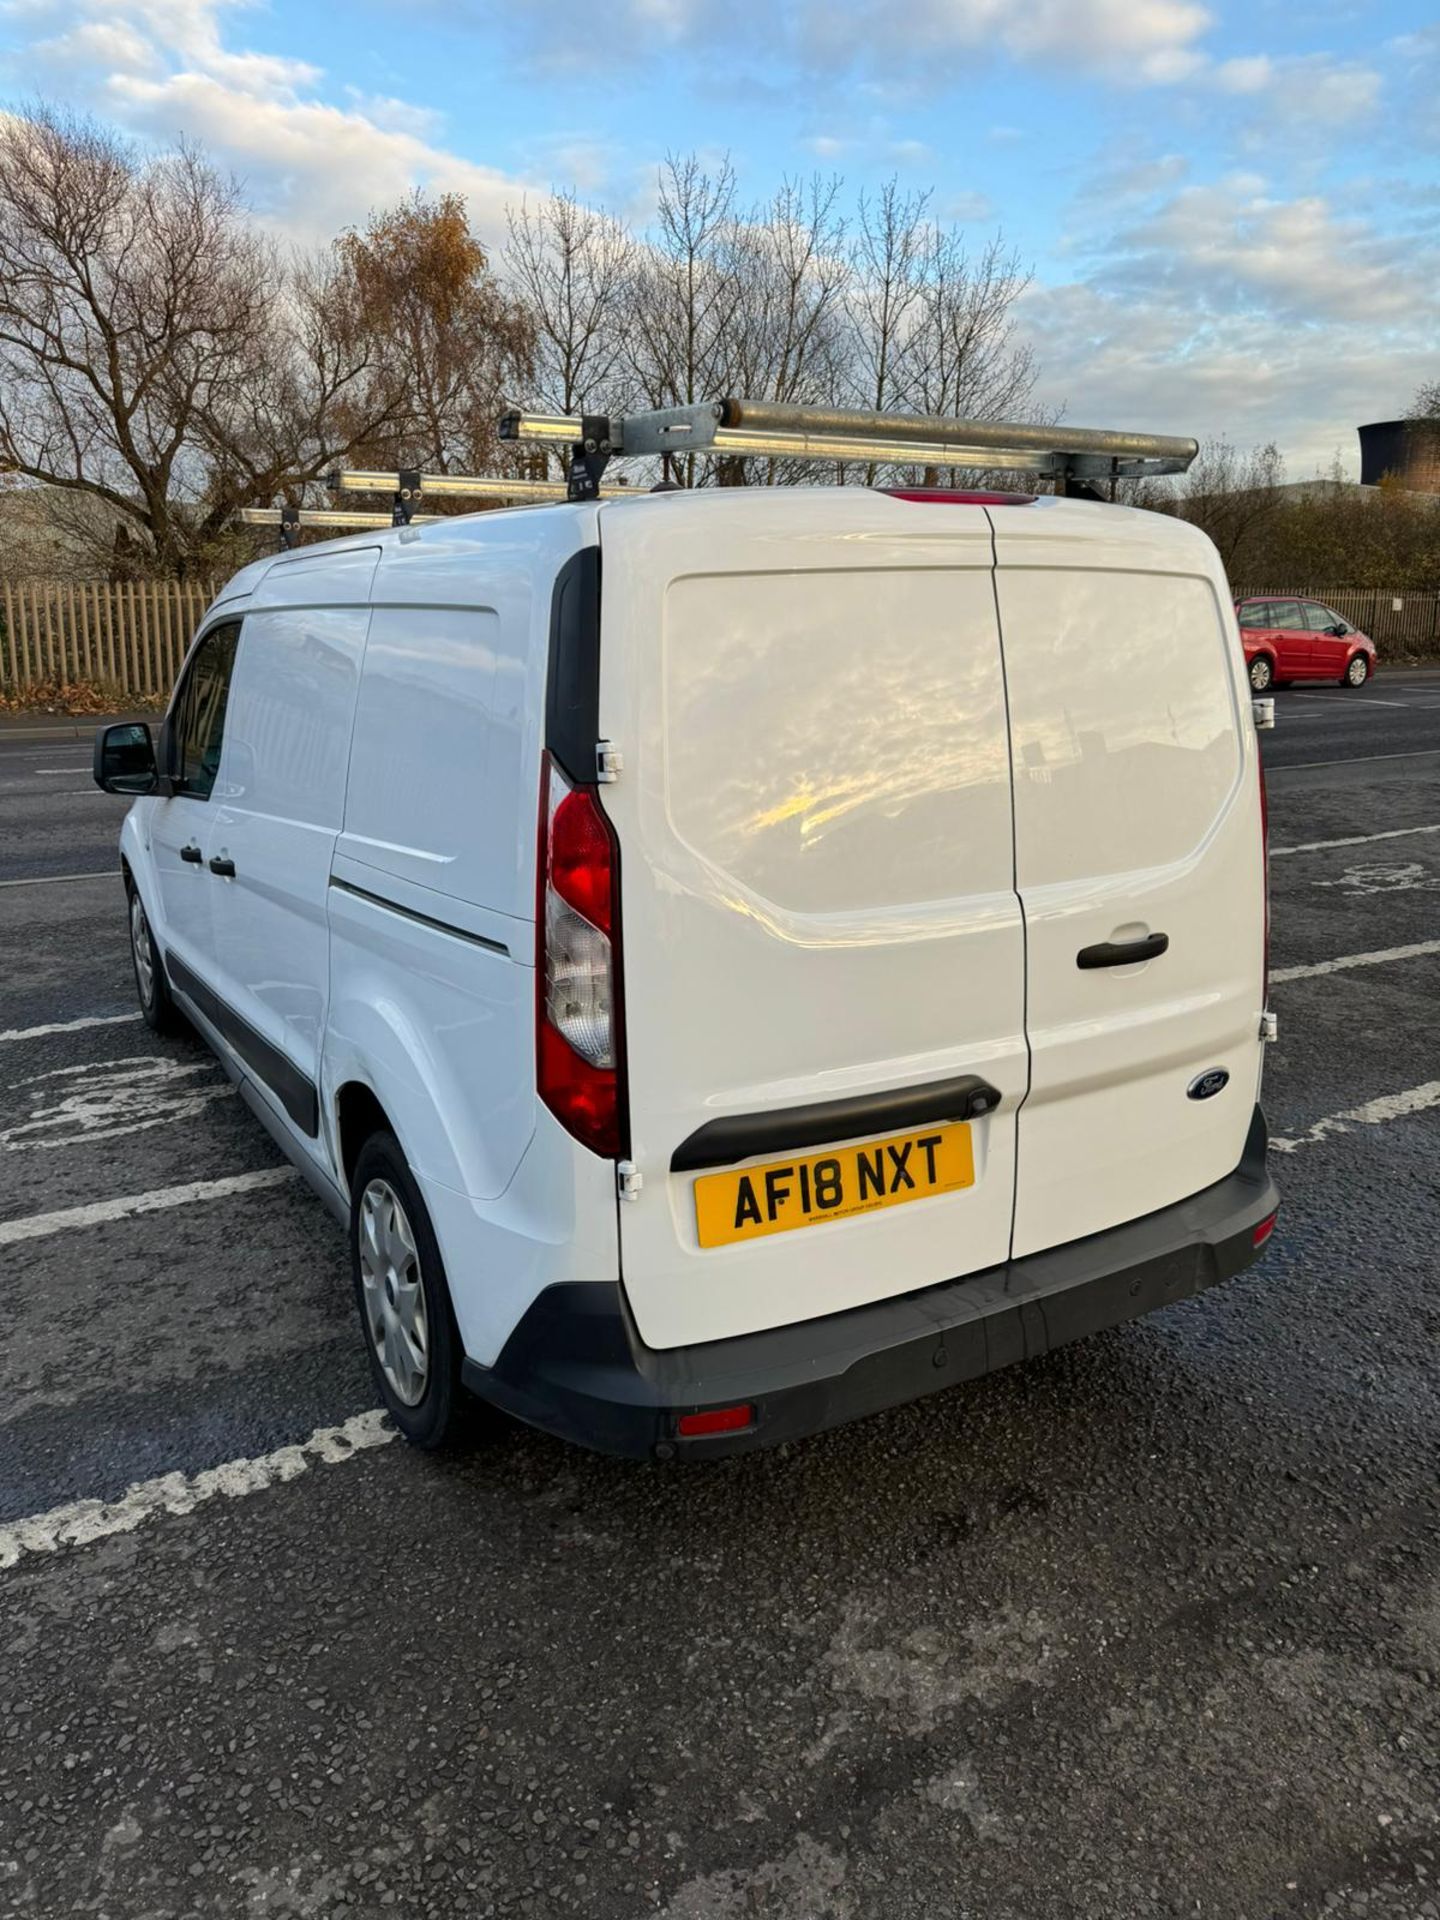 2018 18 FORD TRANSIT CONNECT TREND PAENL VAN - 128K MILES - EURO 6 - 3 SEATS - LWB - ROOF RACK. - Image 4 of 11